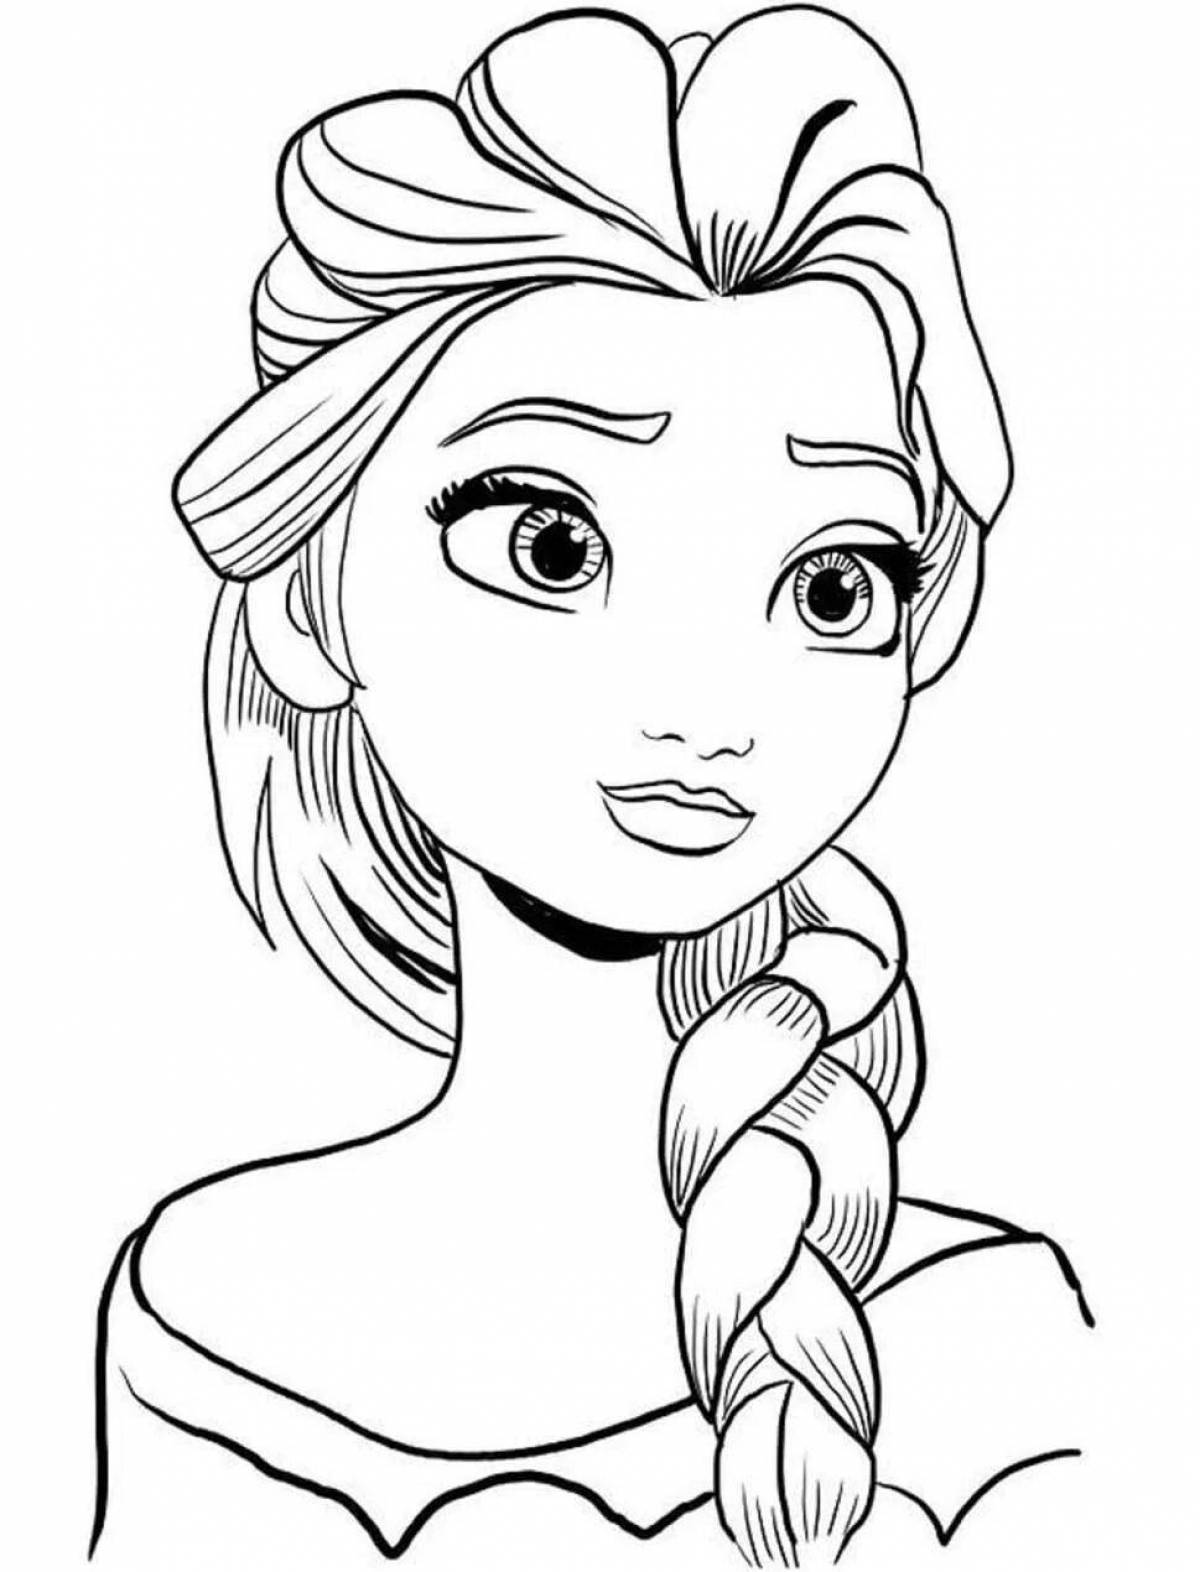 Elsa's deluxe face painting